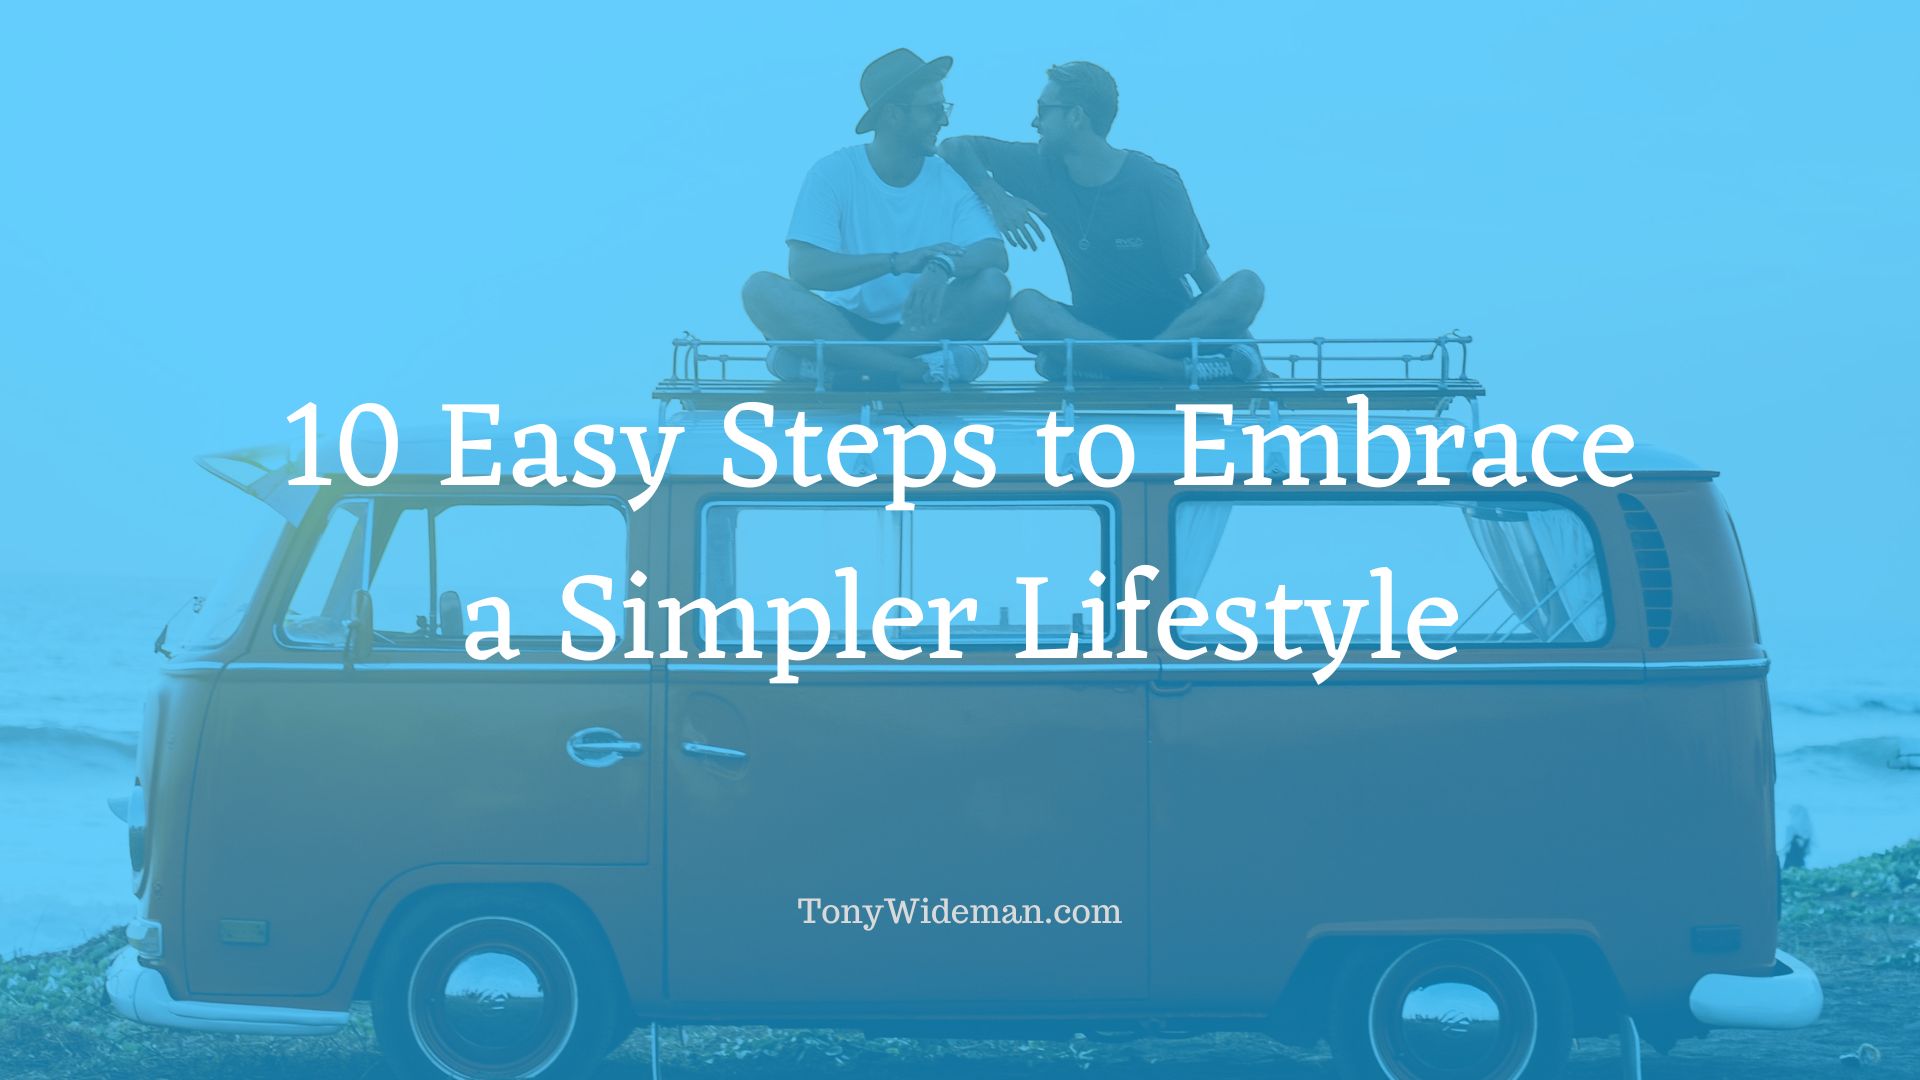 10 Easy Steps to Embrace a Simpler Lifestyle